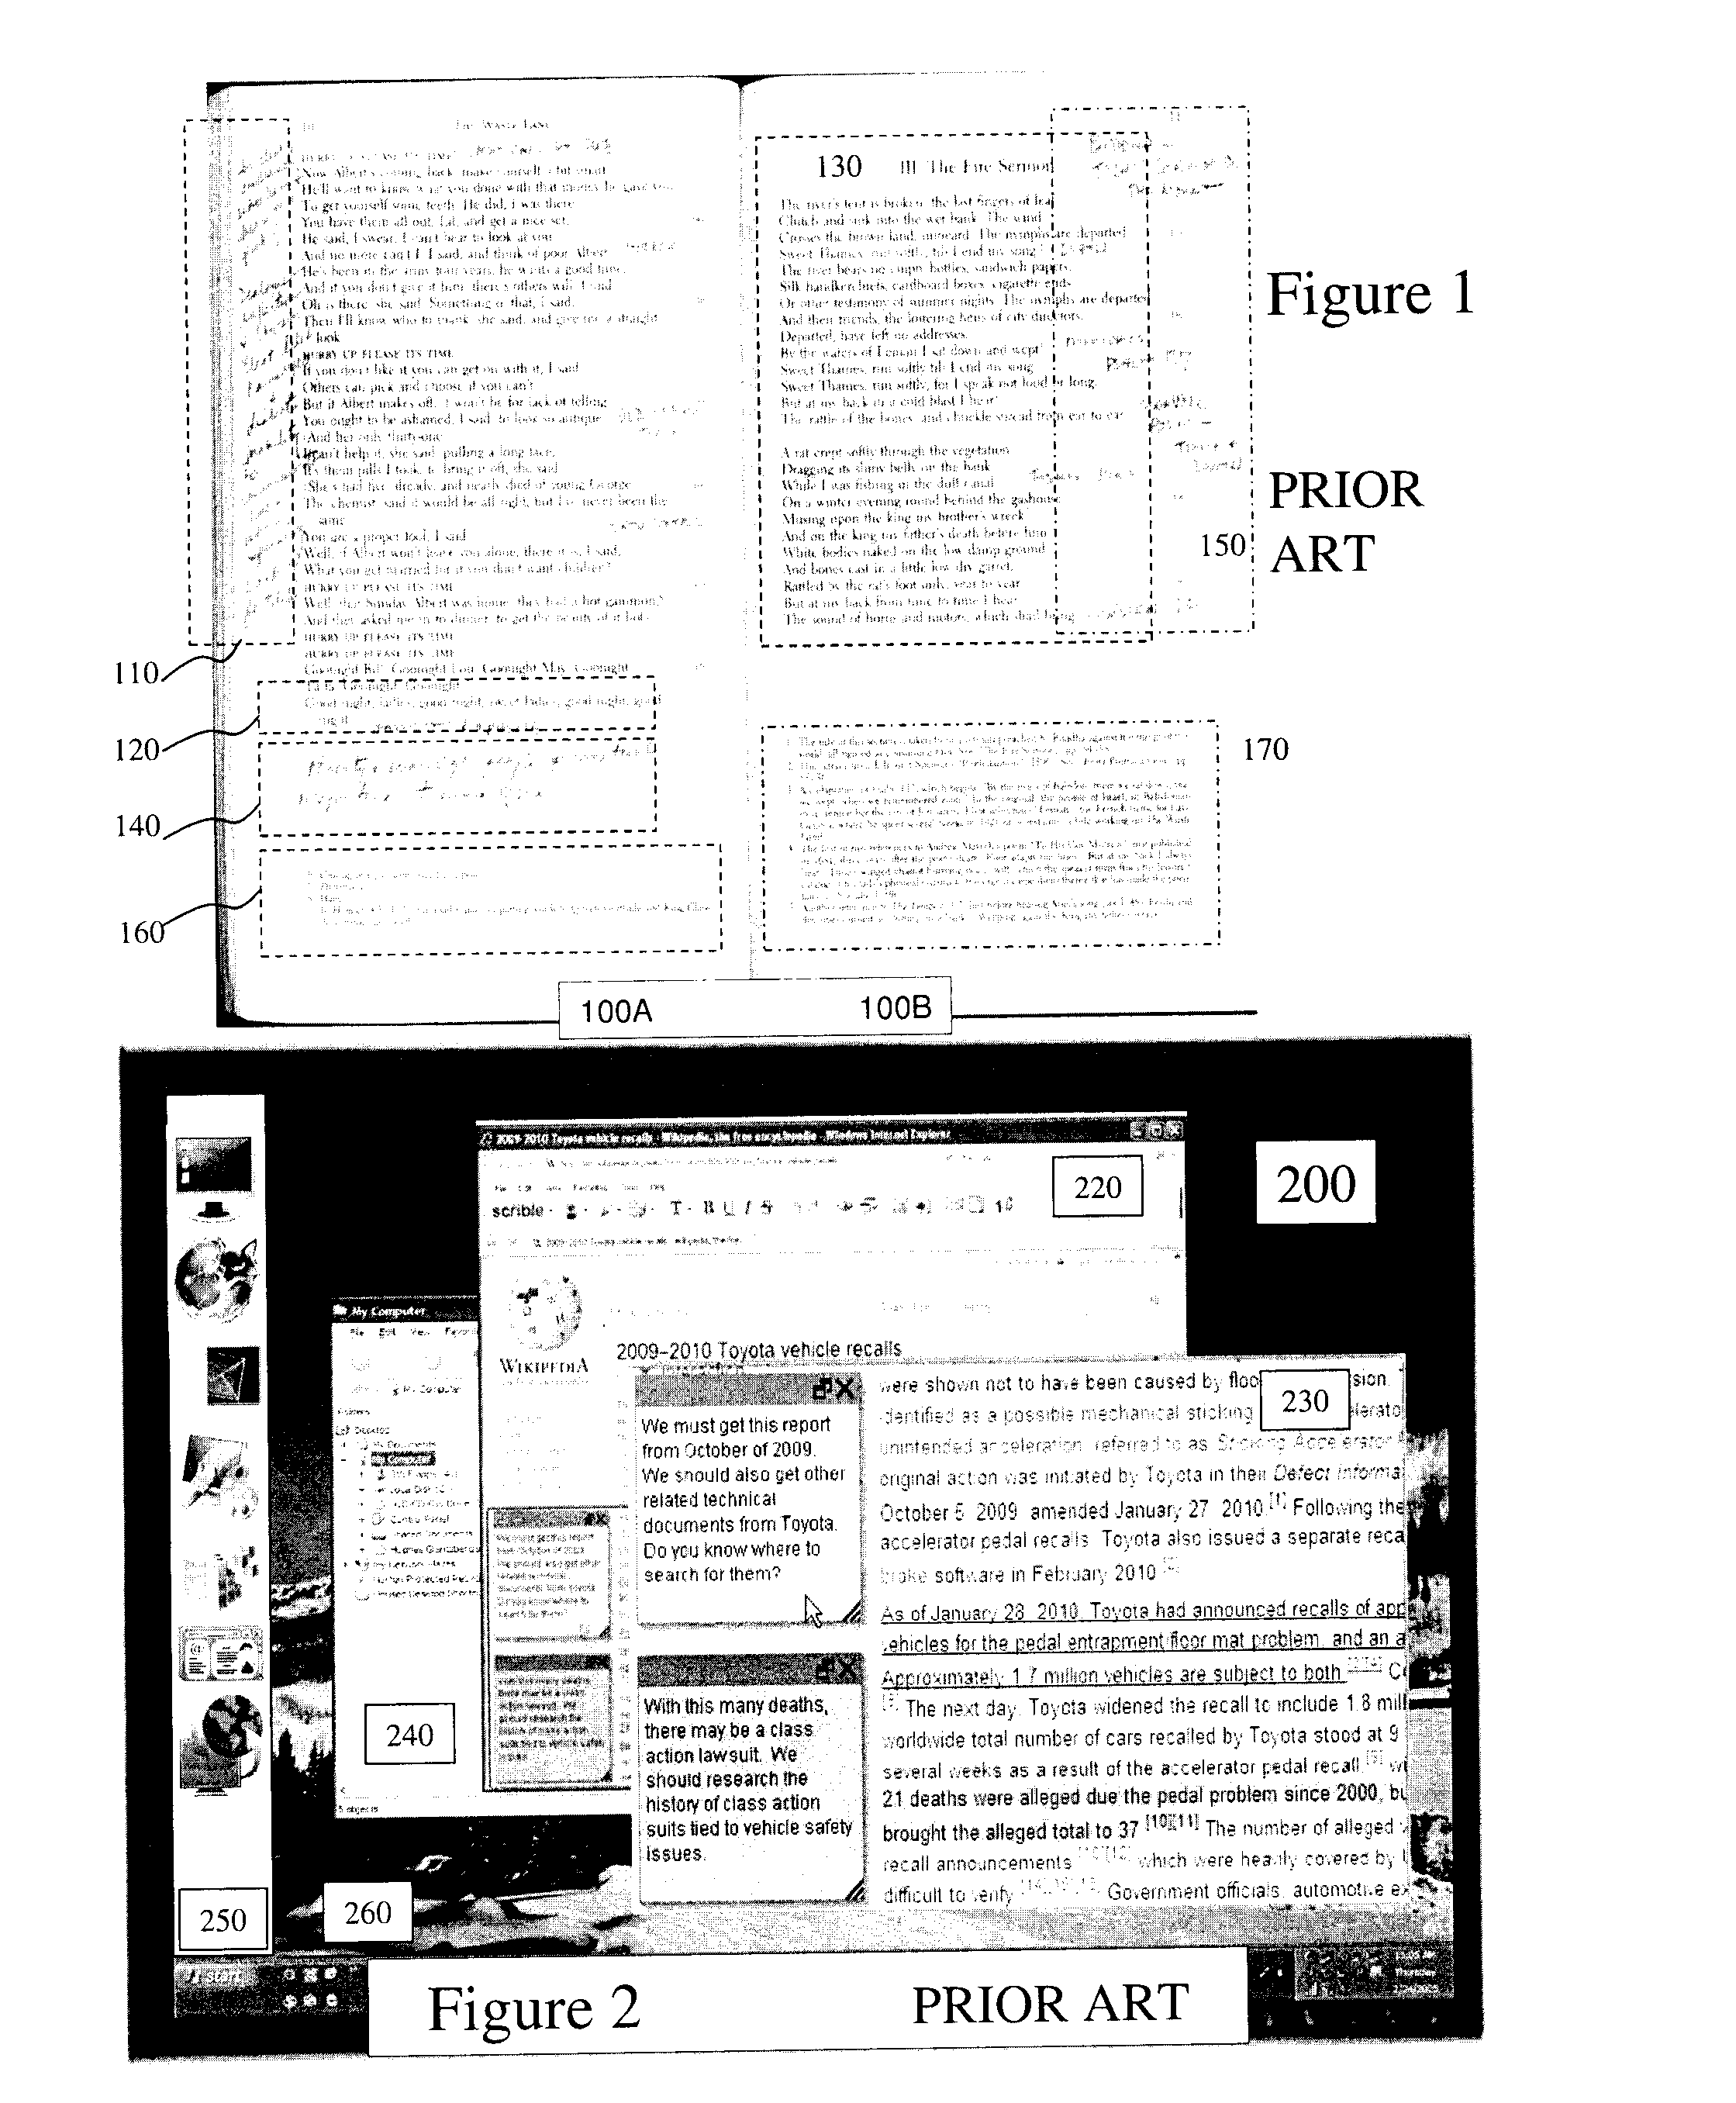 Method of distributing digital publications incorporating user generated and encrypted content with unique fingerprints